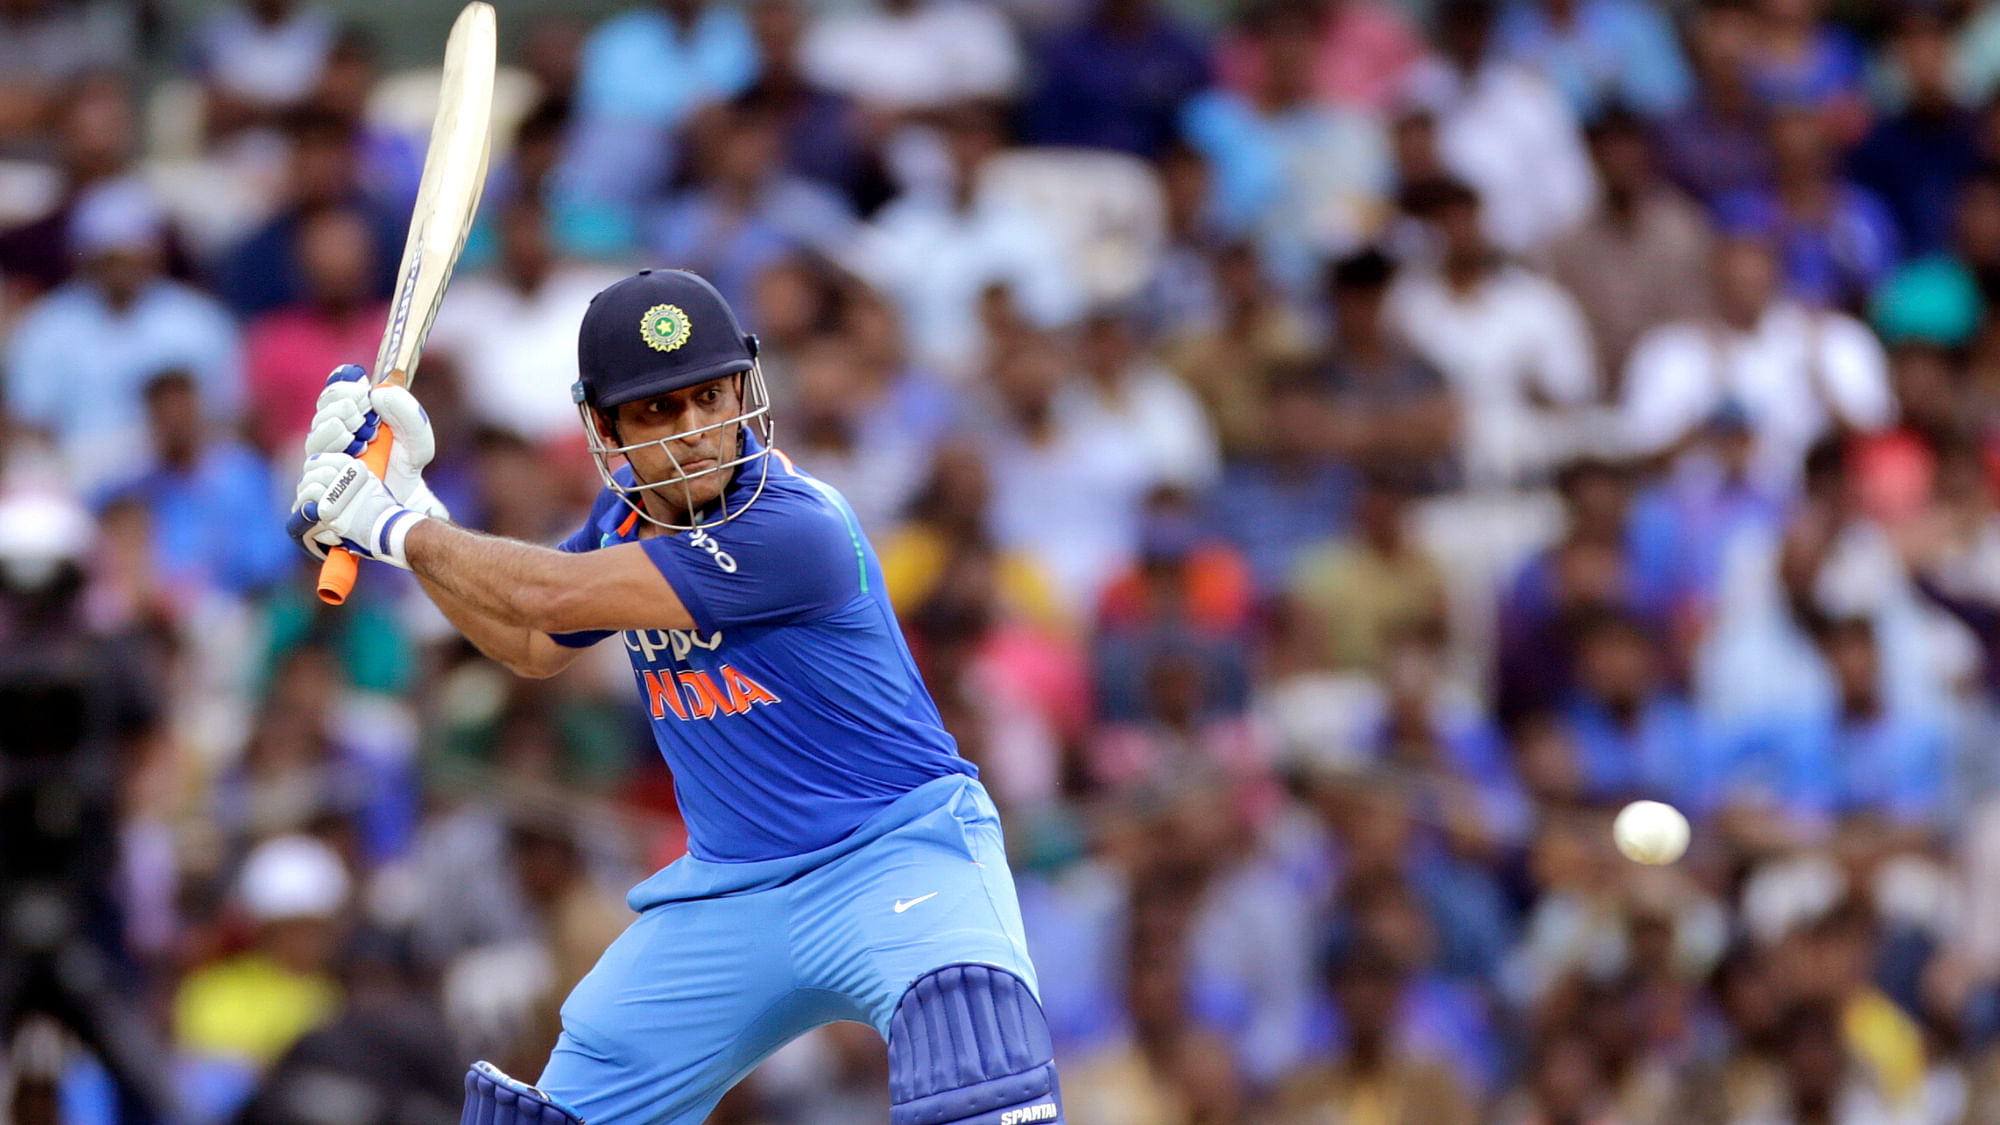 MS Dhoni during his innings at Chennai.